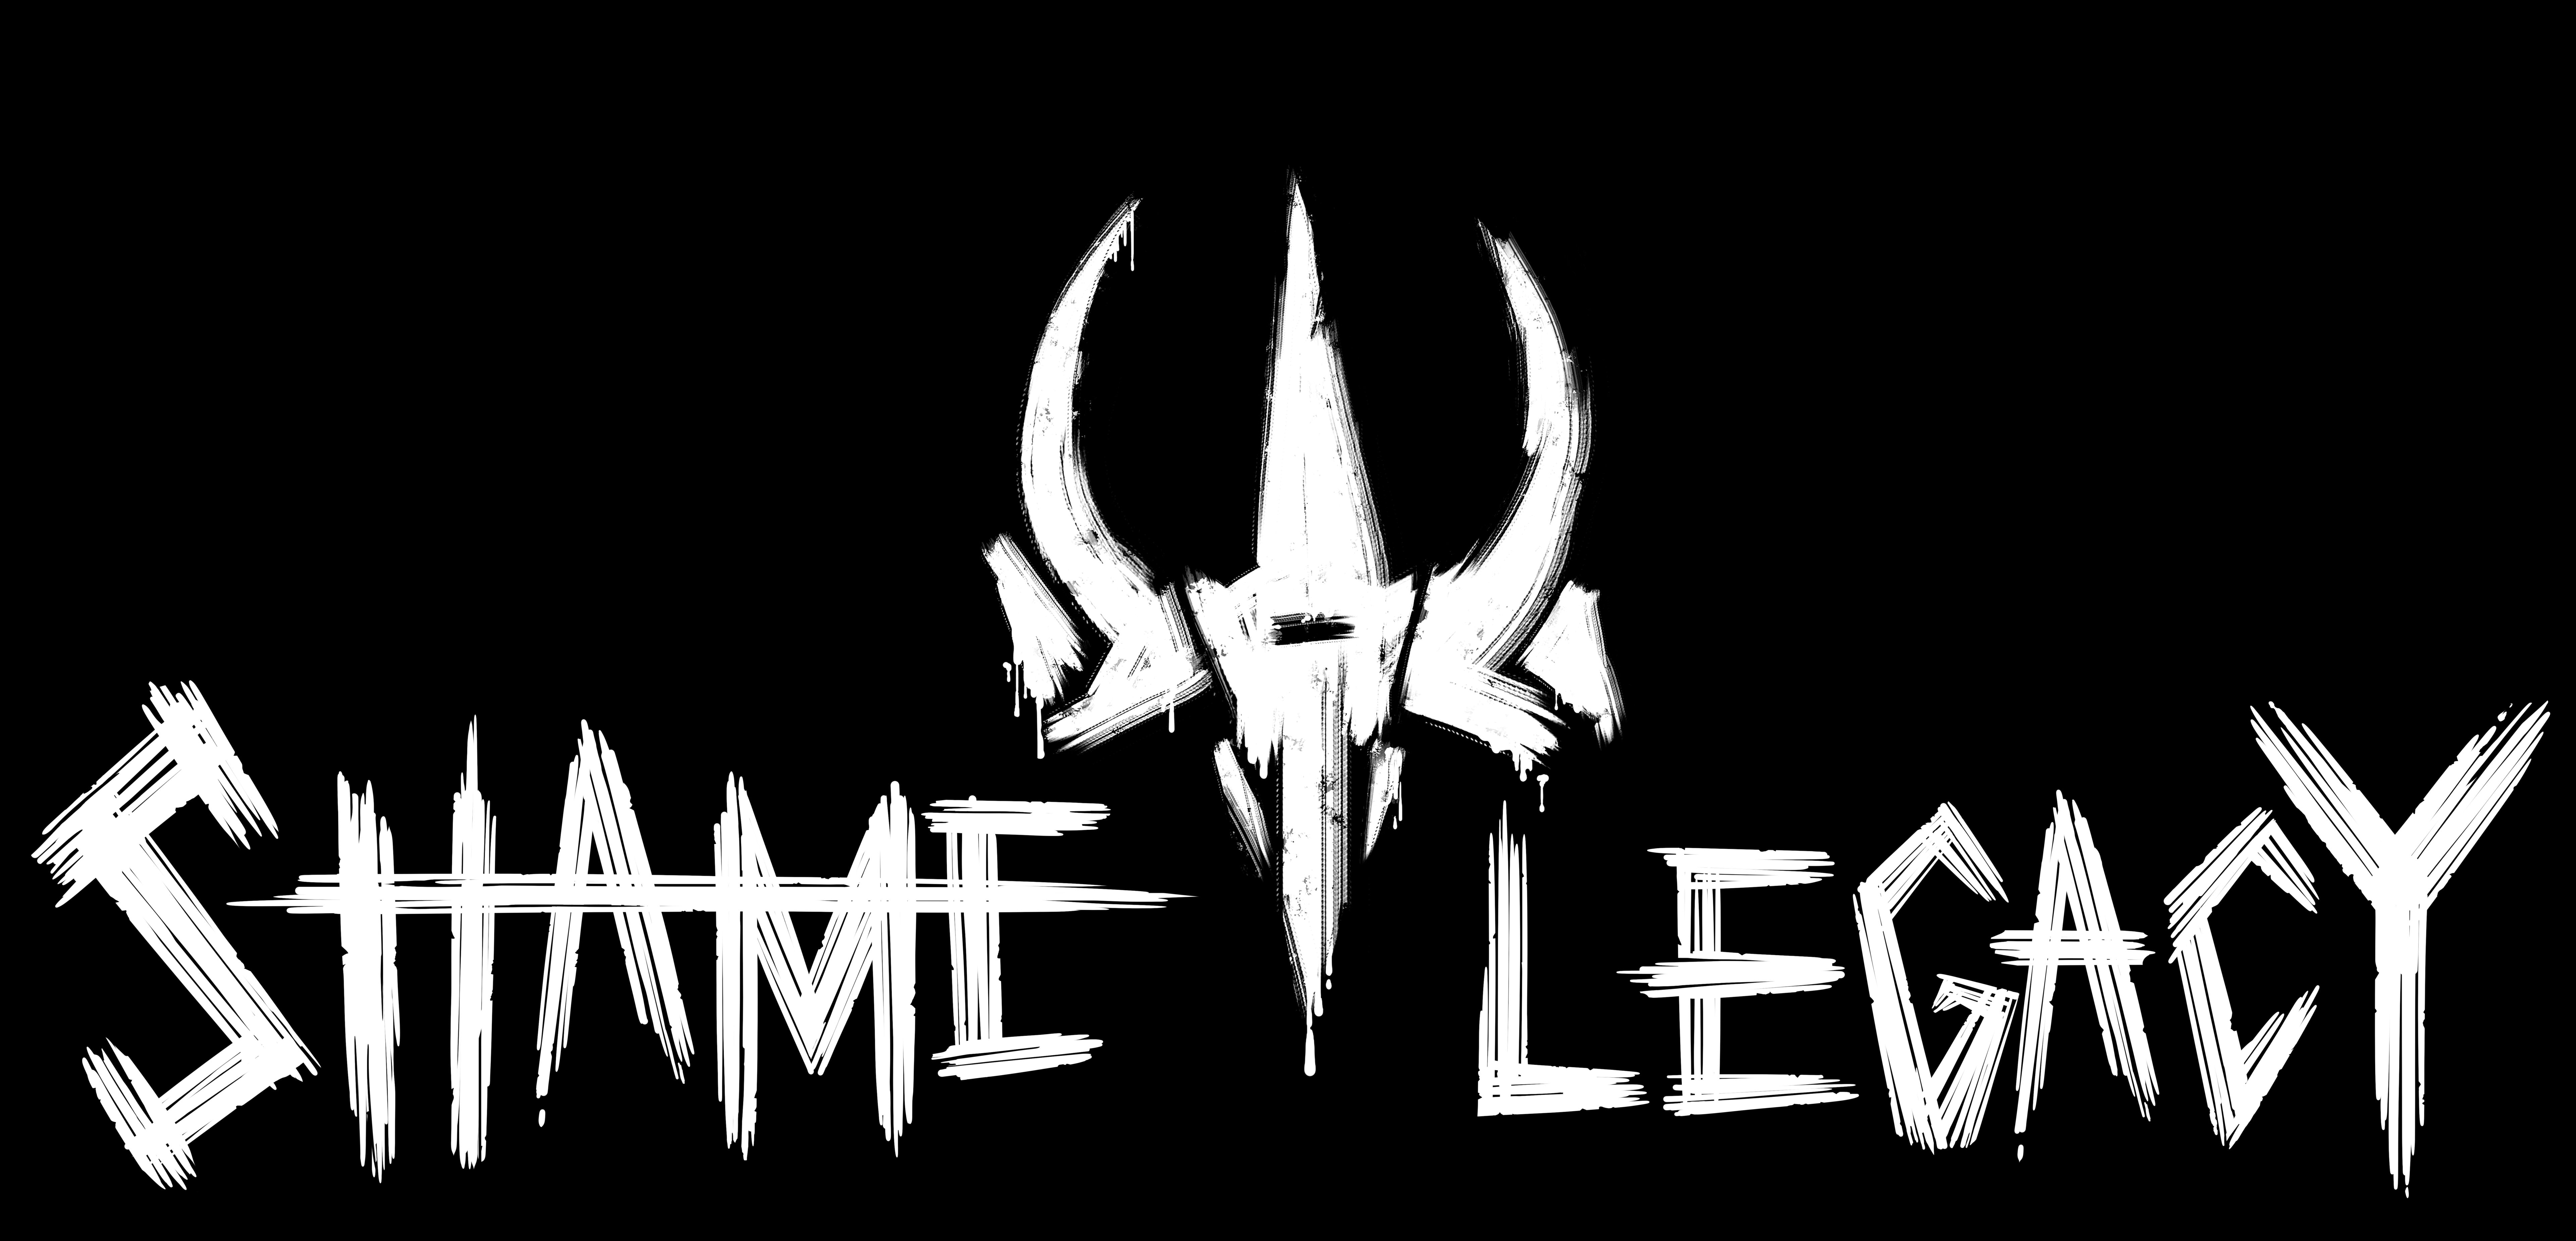 First person survival horror game Shame Legacy announced for PS5